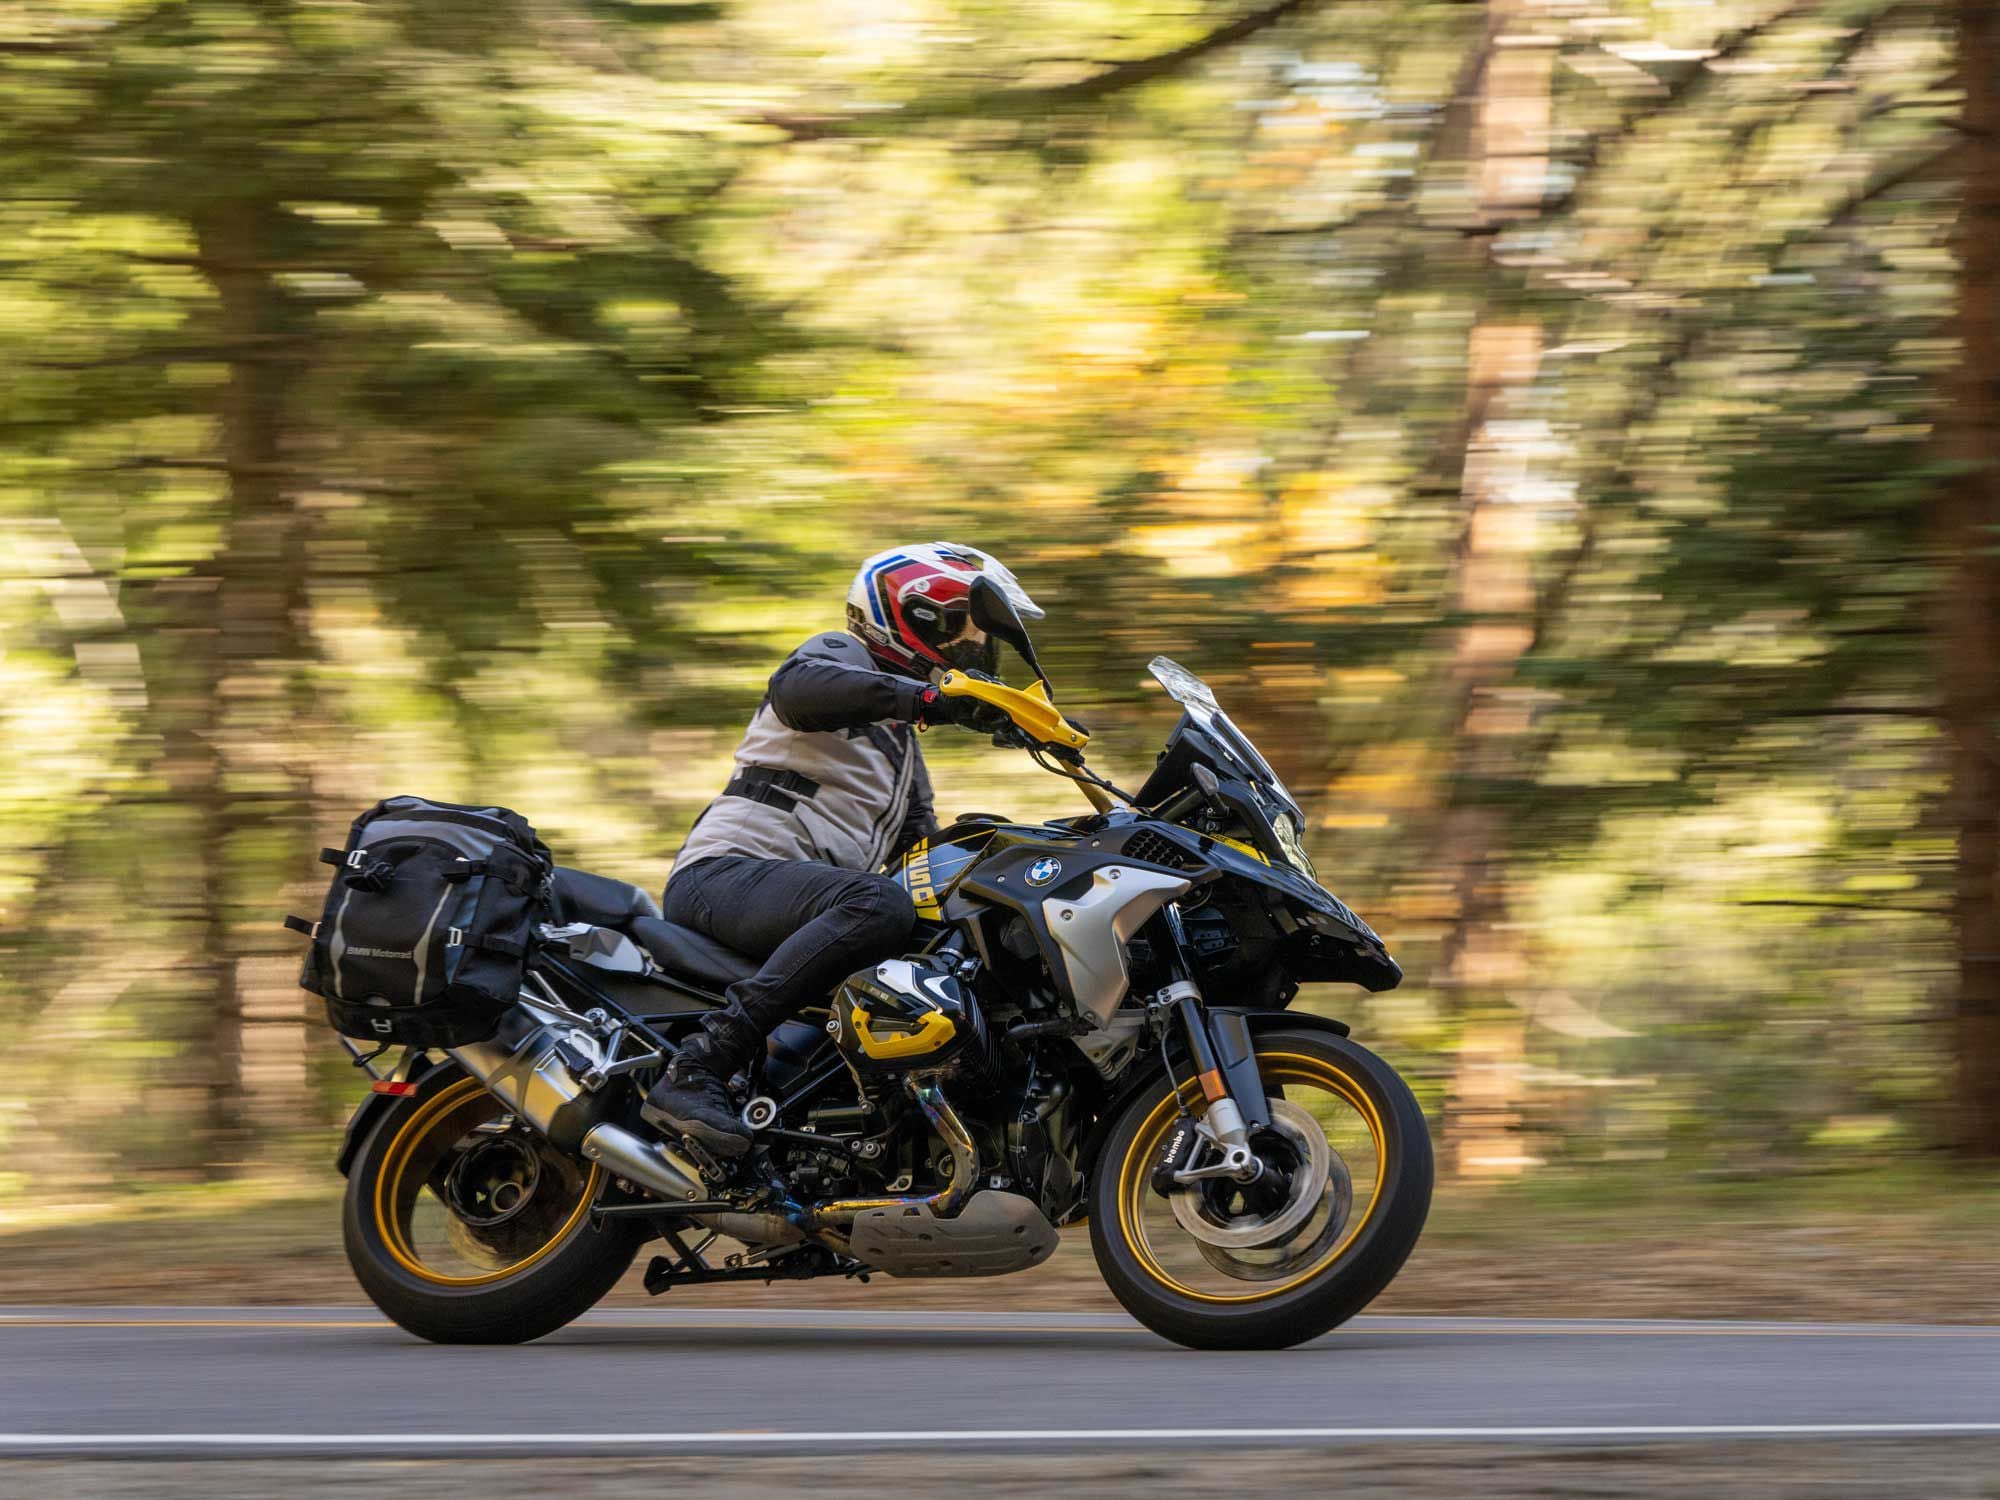 The R 1250 GS’s telelever front end soaks up rough pavement well, yet offers good sporting aptitude when the road gets twisty.